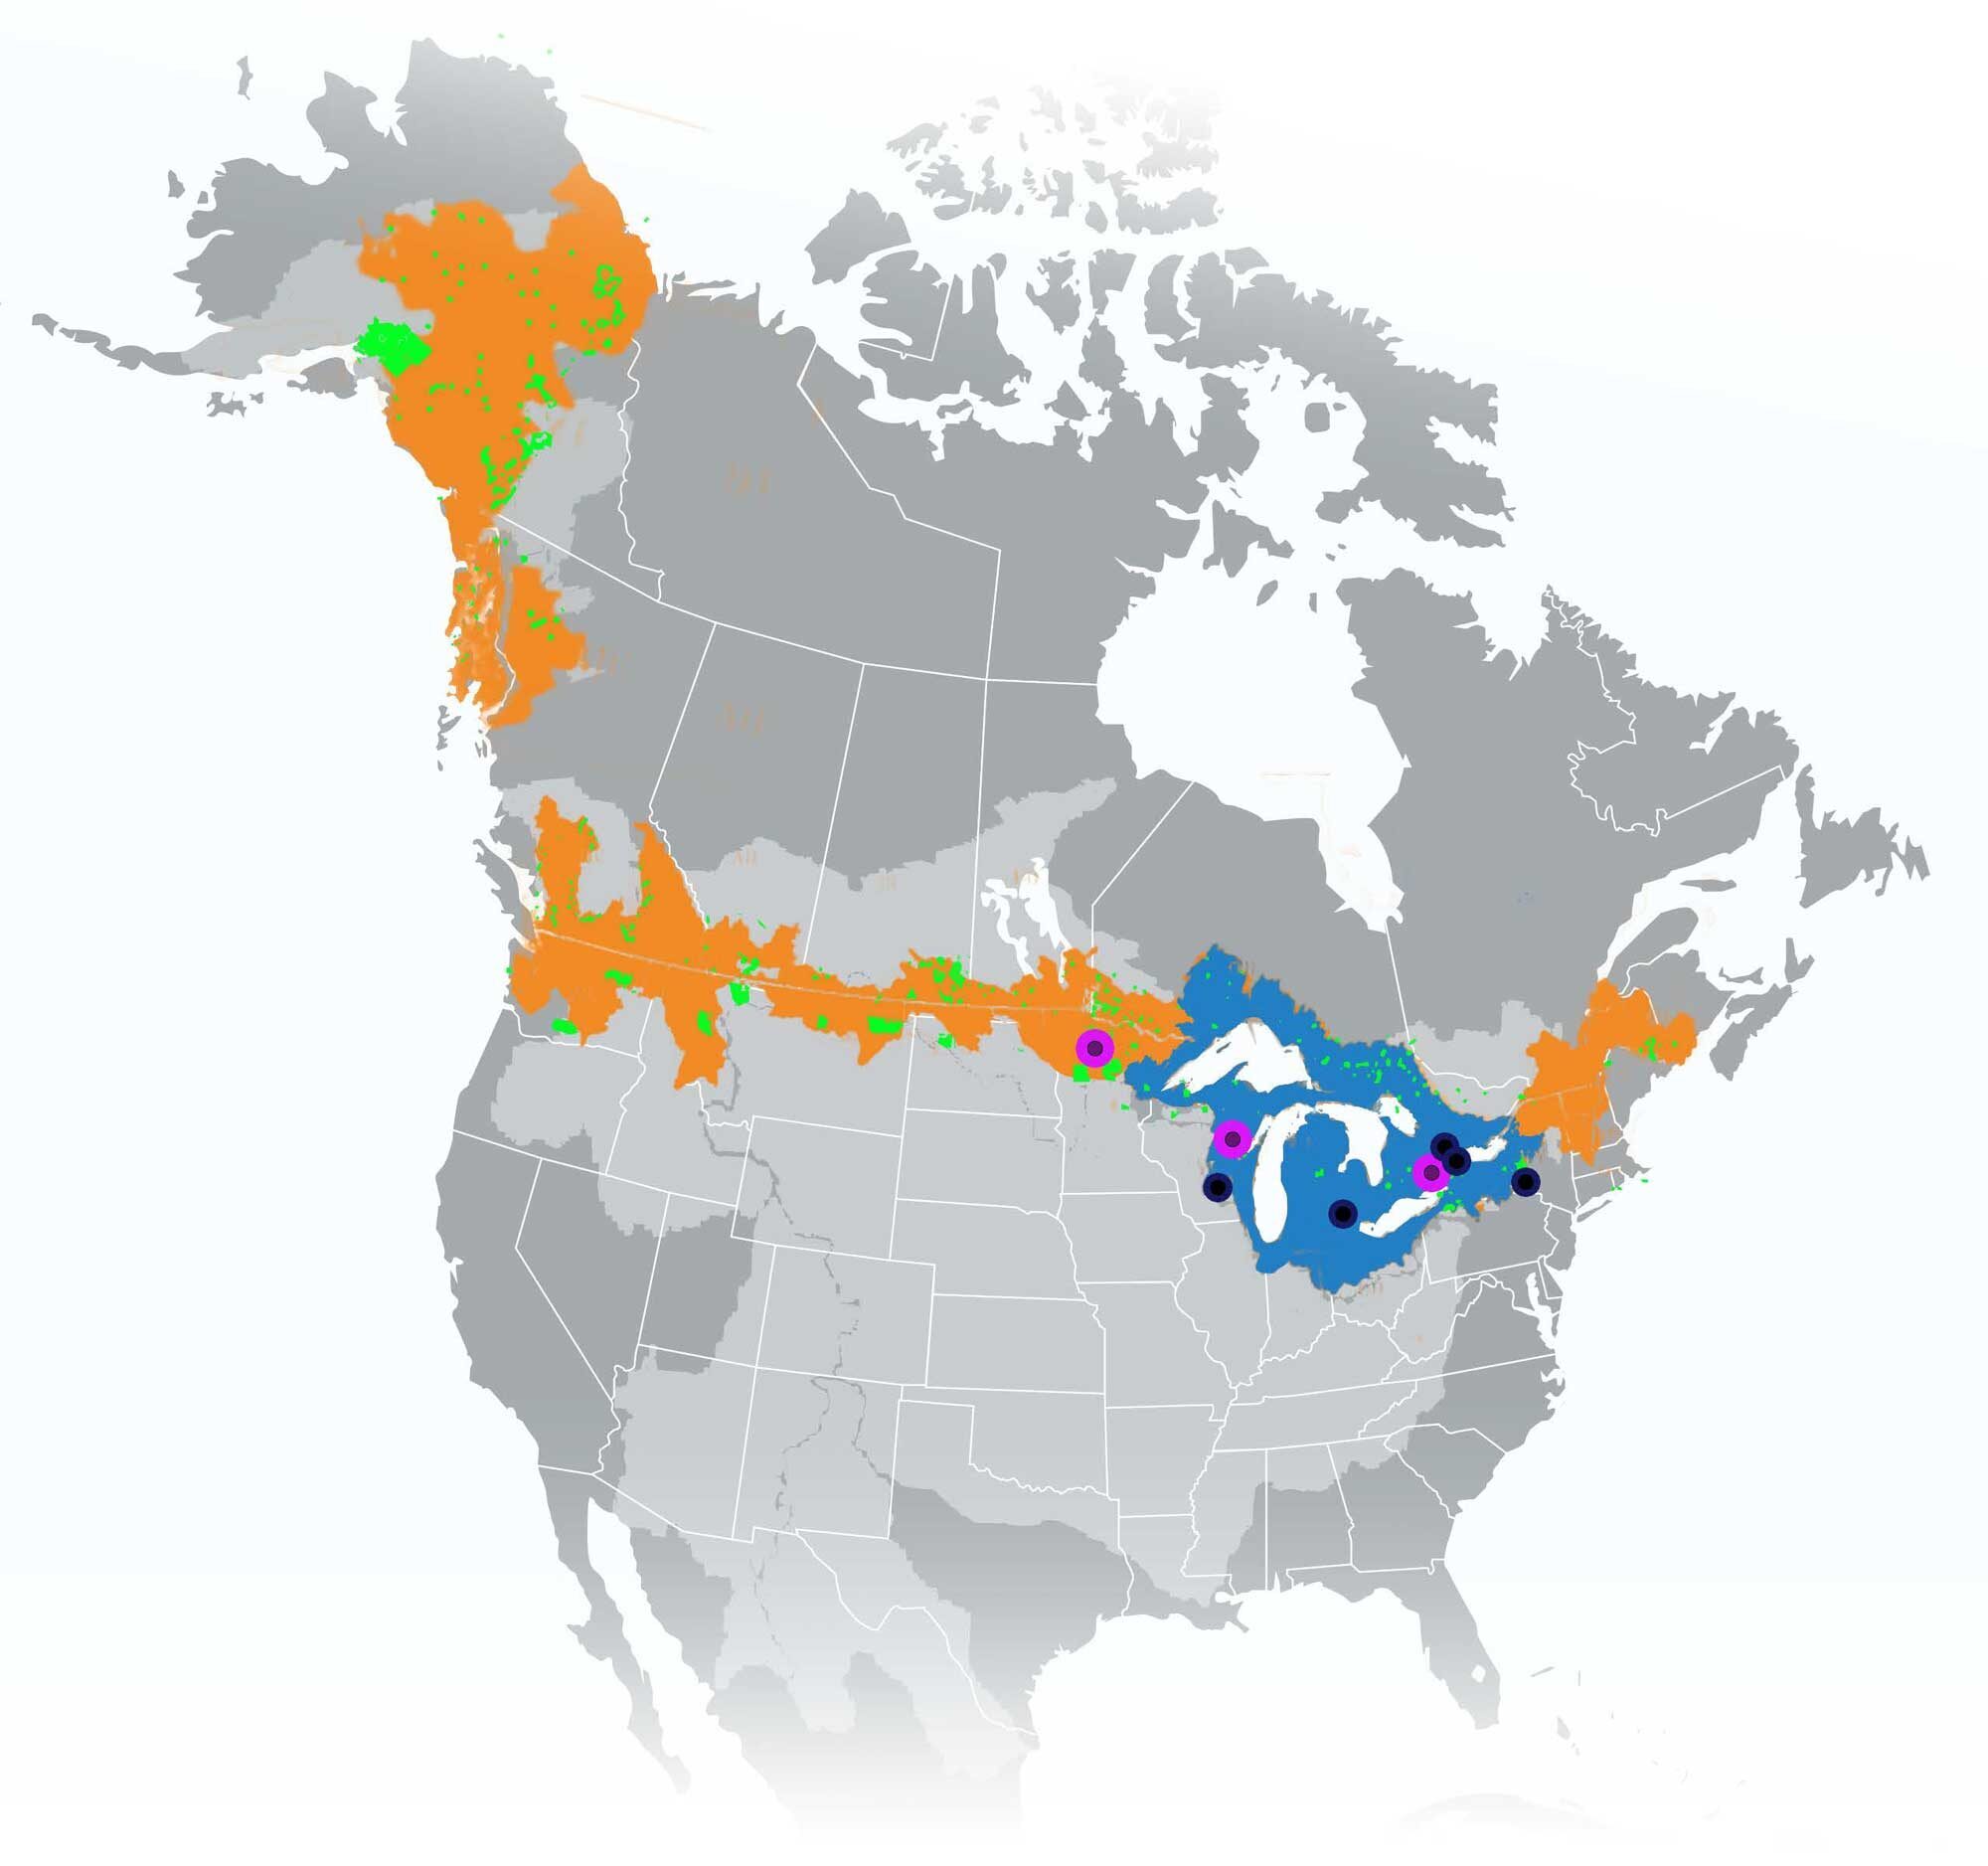 Above: The new Global Center will draw on relationships and policies from transboundary watersheds and Indigenous Territories along the entire U.S.-Canada border (orange and green regions, respectively). The Great Lakes Basin (blue) serves as an initial area of focus. Directly funded project partners are identified as black dots, with Indigenous partners highlighted by a purple ring. All of North America’s transboundary basins are highlighted in light grey for reference.   Image credit: SEAS and Office of the U-M Vice President for Research